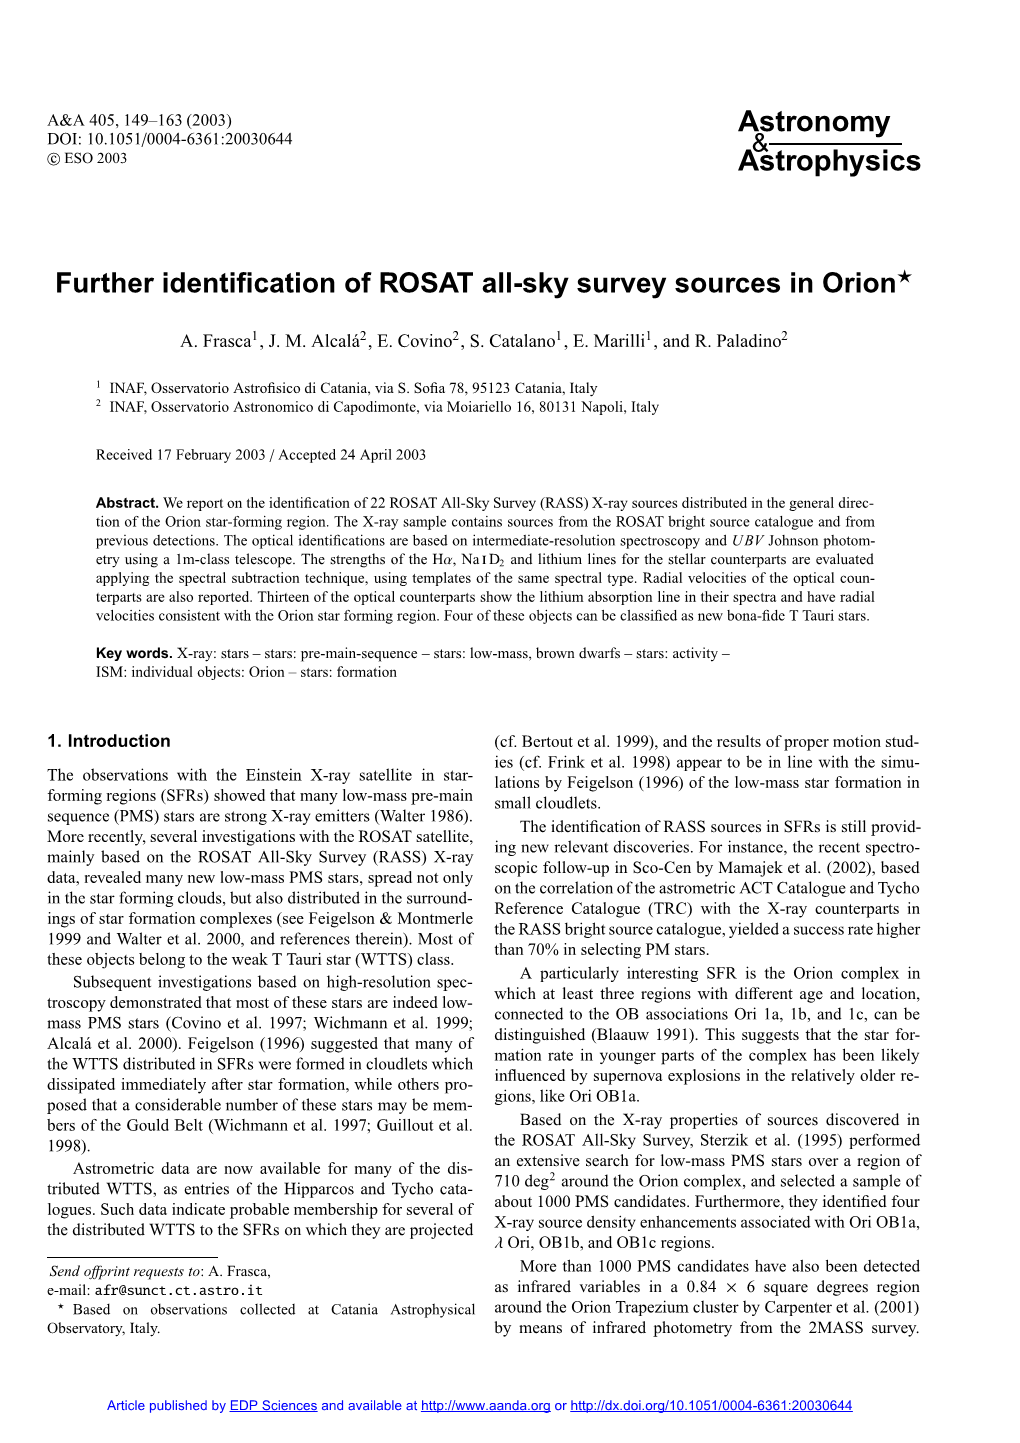 Further Identification of ROSAT All-Sky Survey Sources in Orion